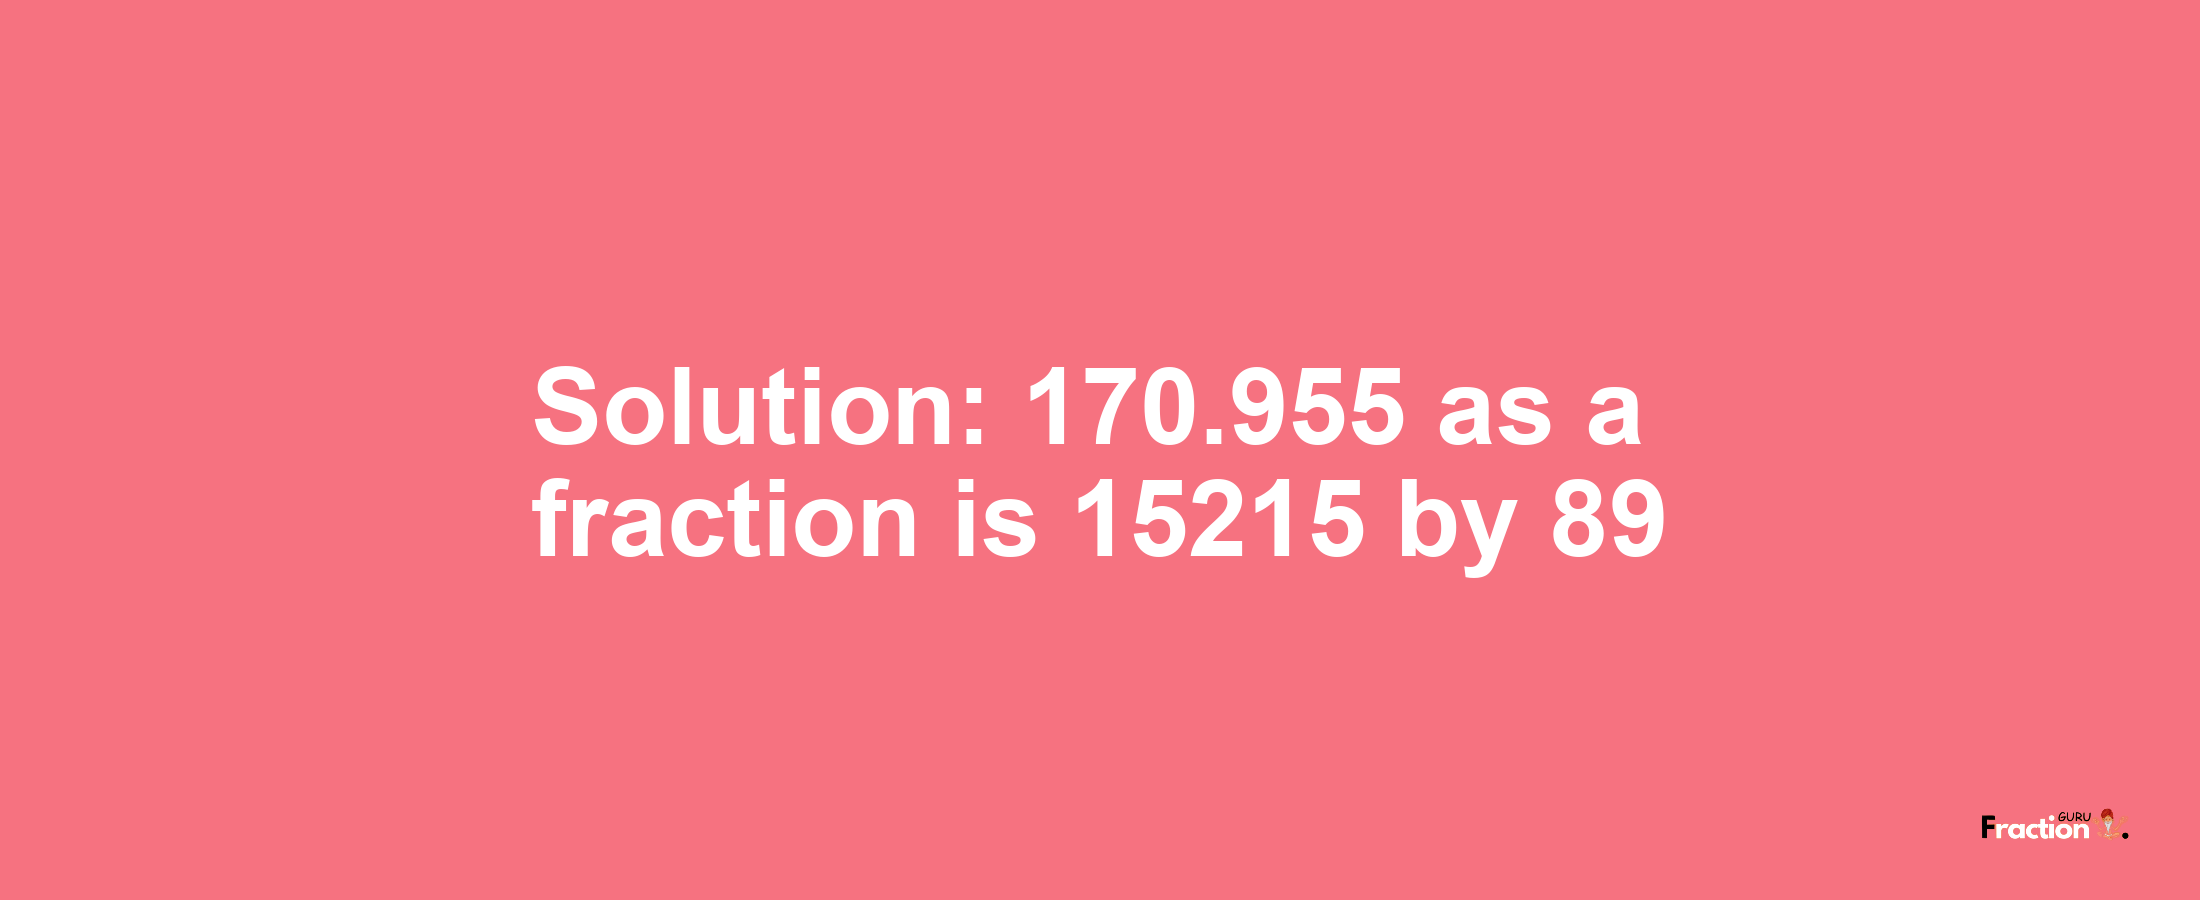 Solution:170.955 as a fraction is 15215/89